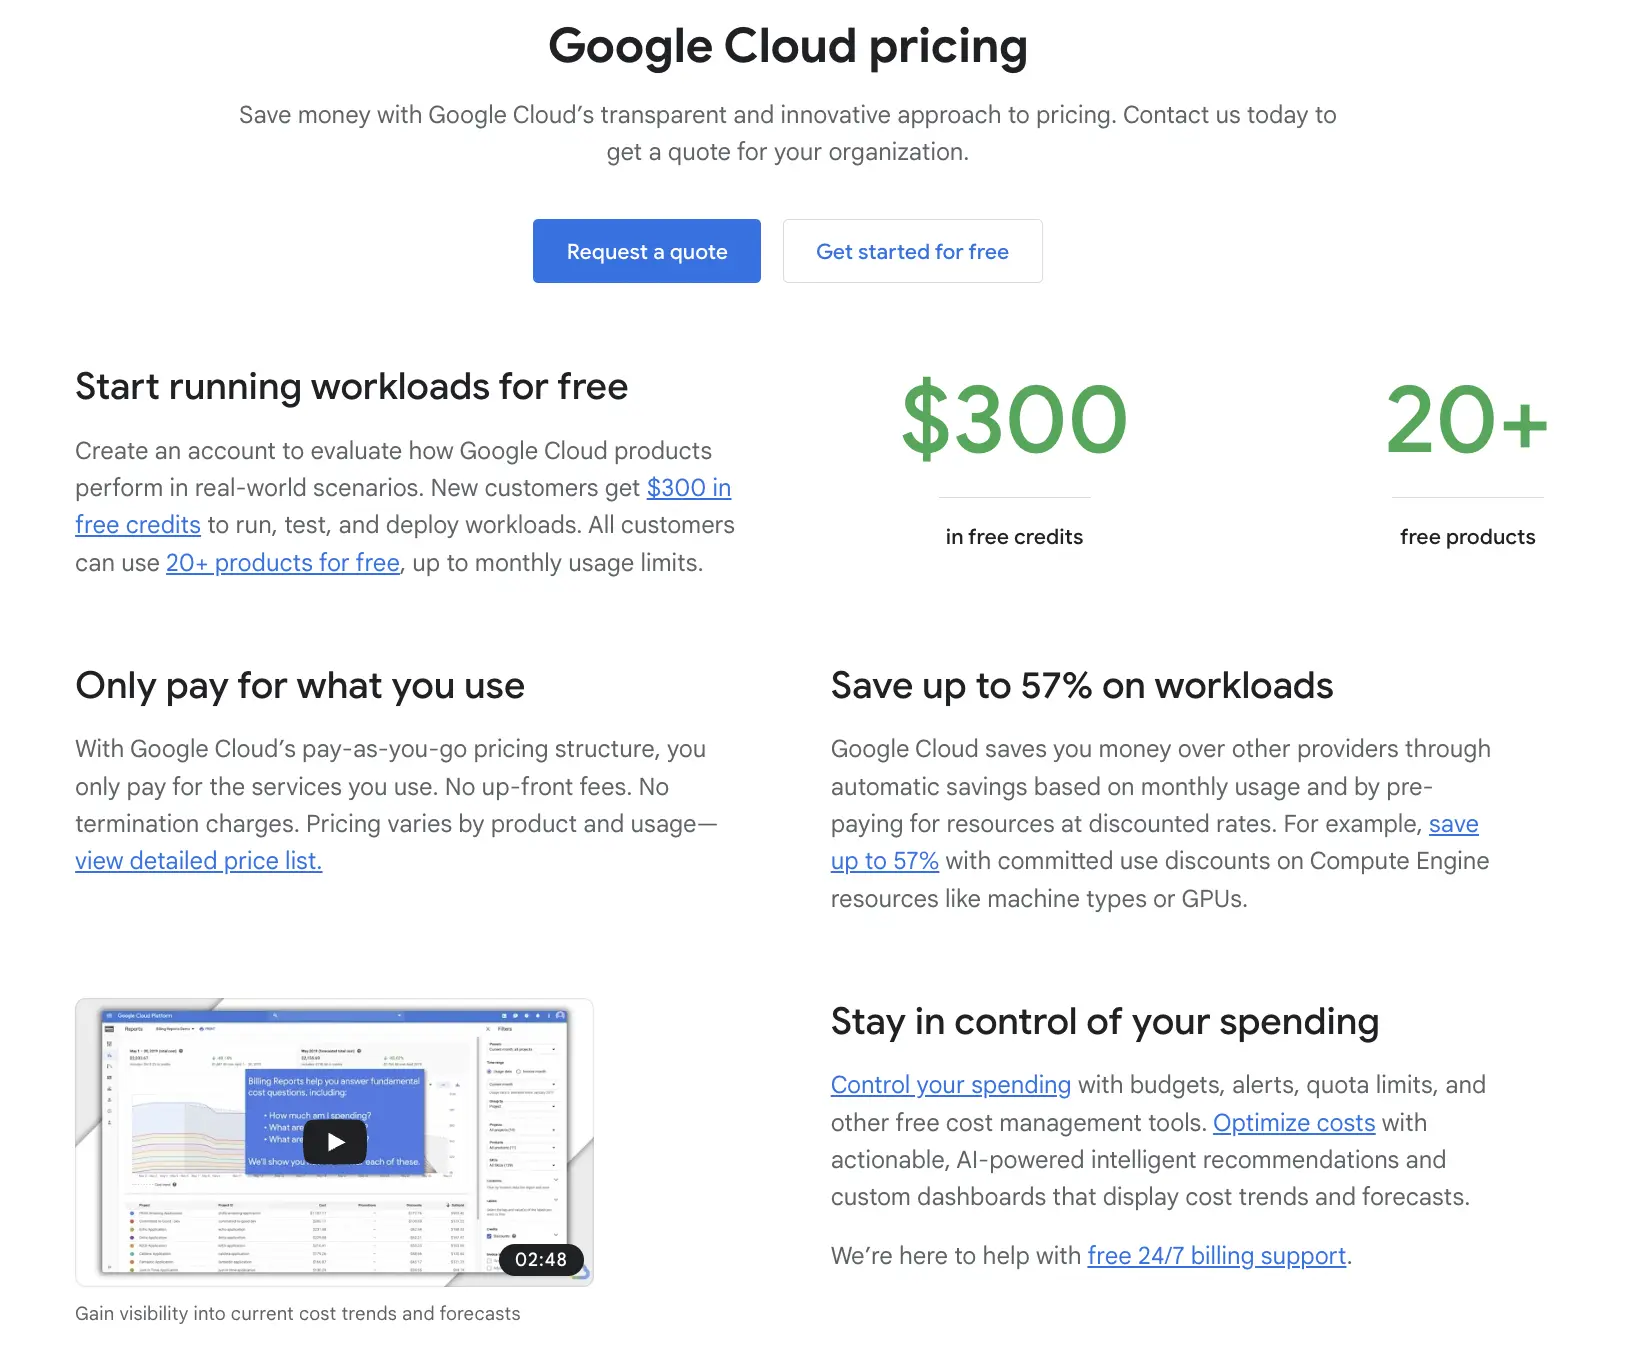 How much does Google Cloud AI cost?